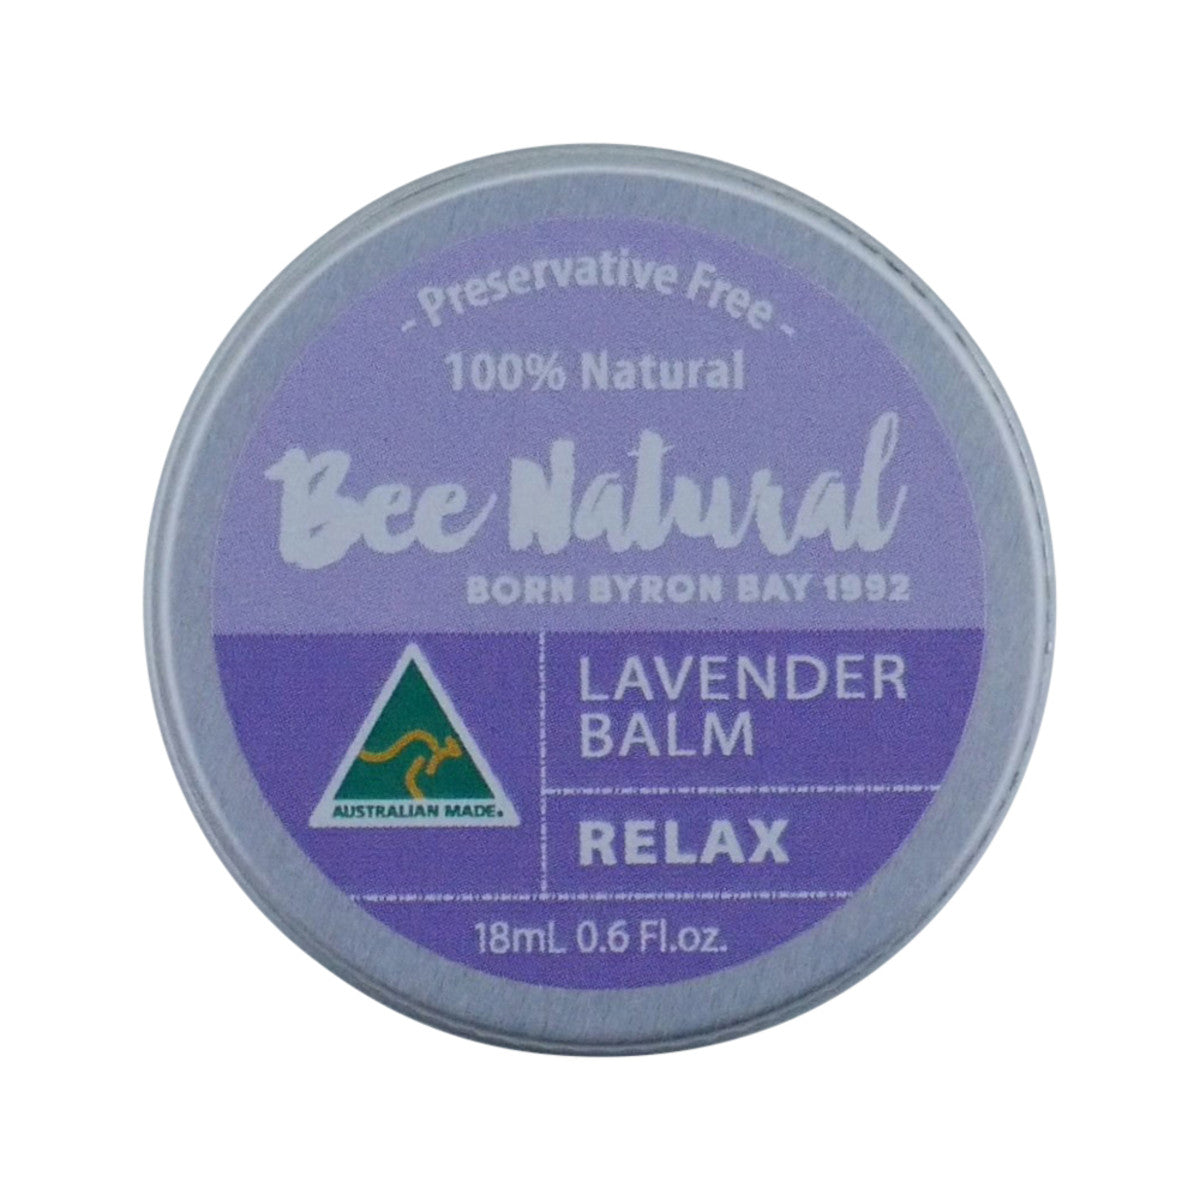 Bee Natural - Balm Lavender Relax